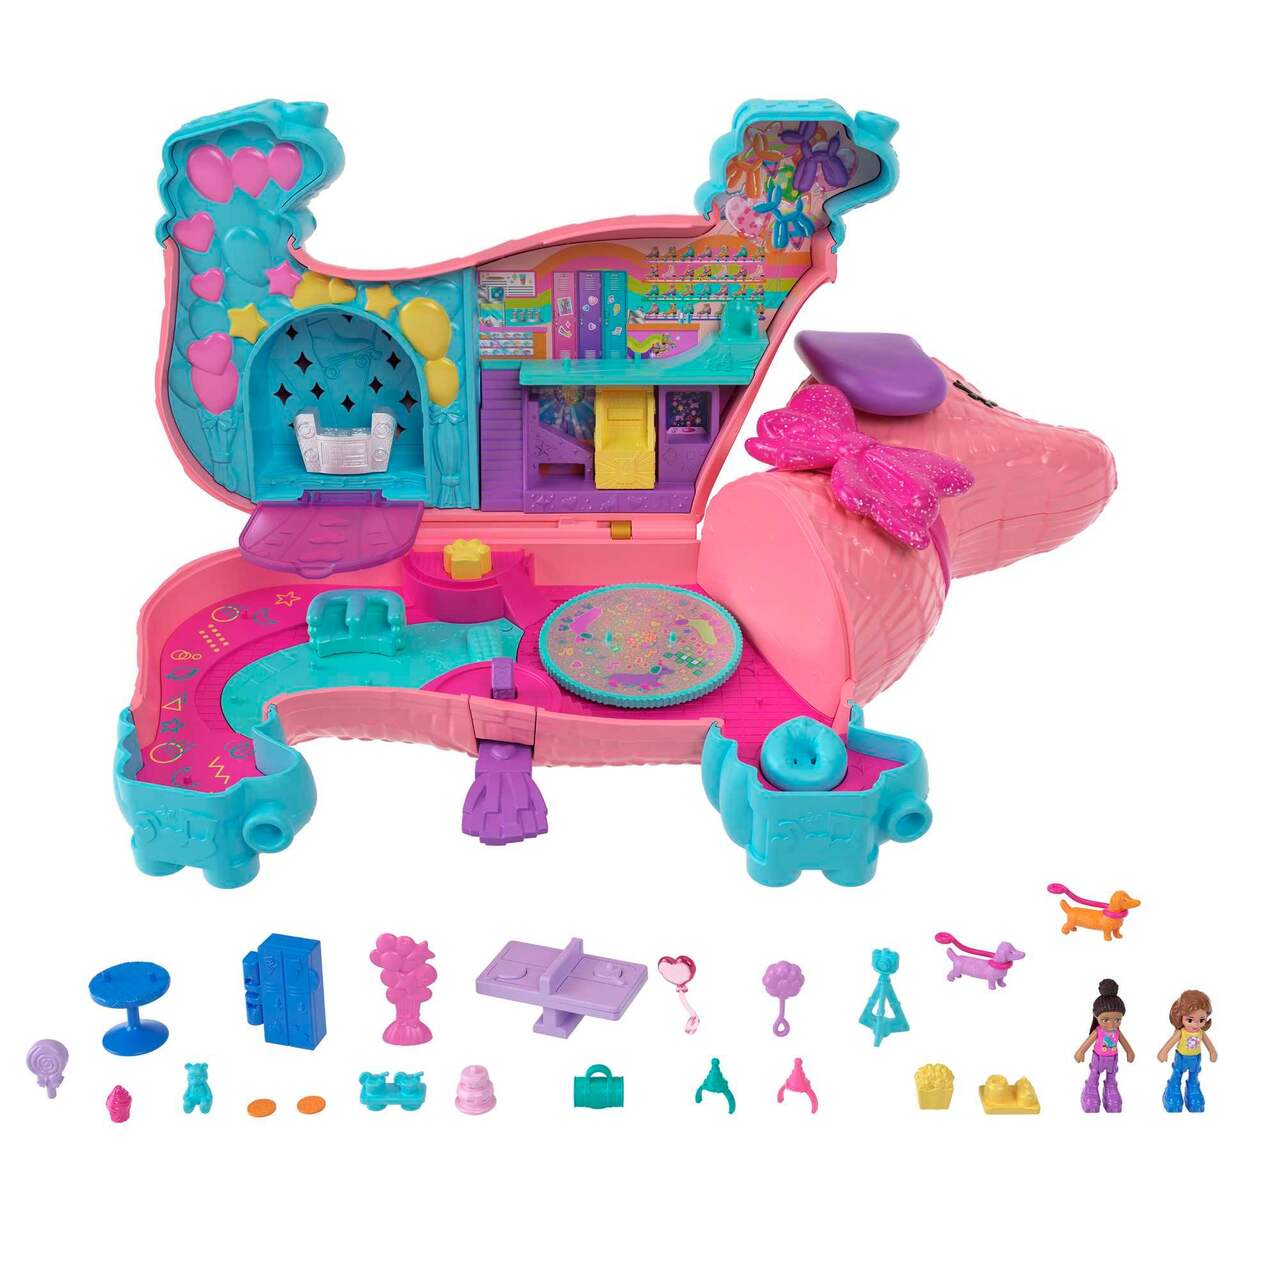 POLLY POCKET Coffret Anniversaire chiot Polly Pocket pas cher 